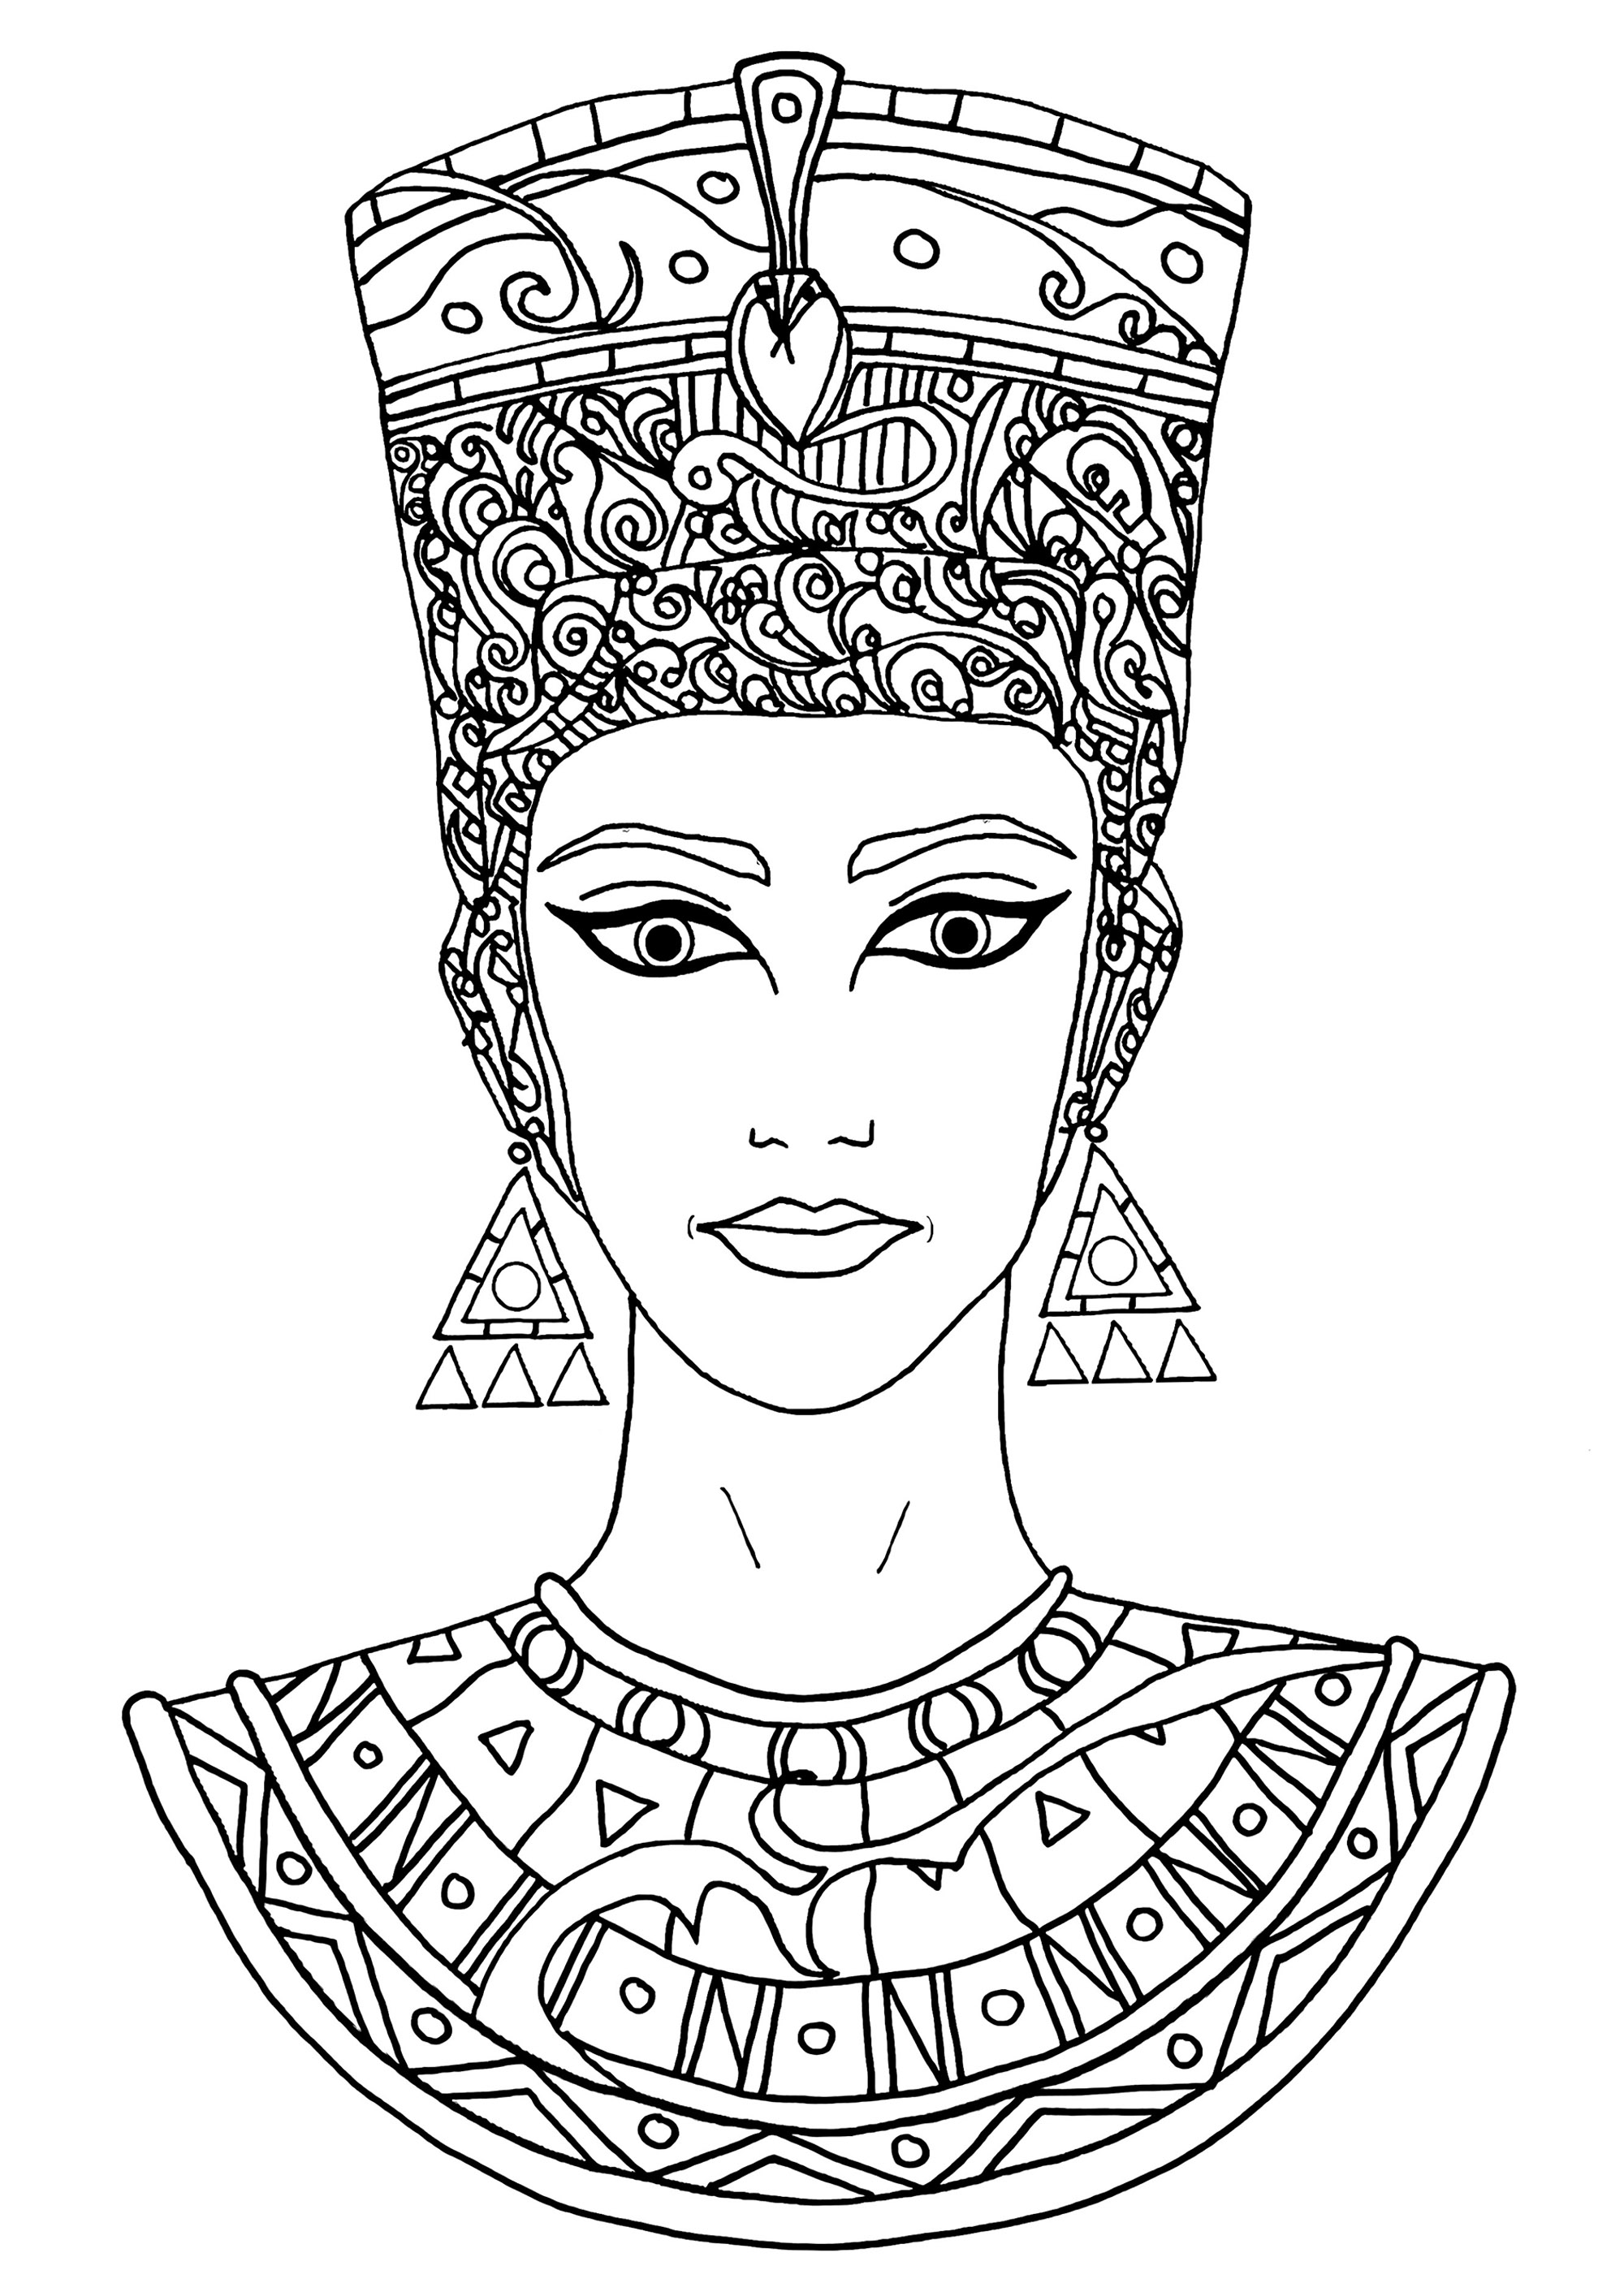 Nice drawing of Nefertiti to color. Nefertiti was a very important, powerful and respected queen in Egypt long ago. She was the wife of King Akhenaten and together they ruled the country and helped change the religious beliefs of Egypt. Nefertiti was very beautiful and a statue of her was found that is very famous today.